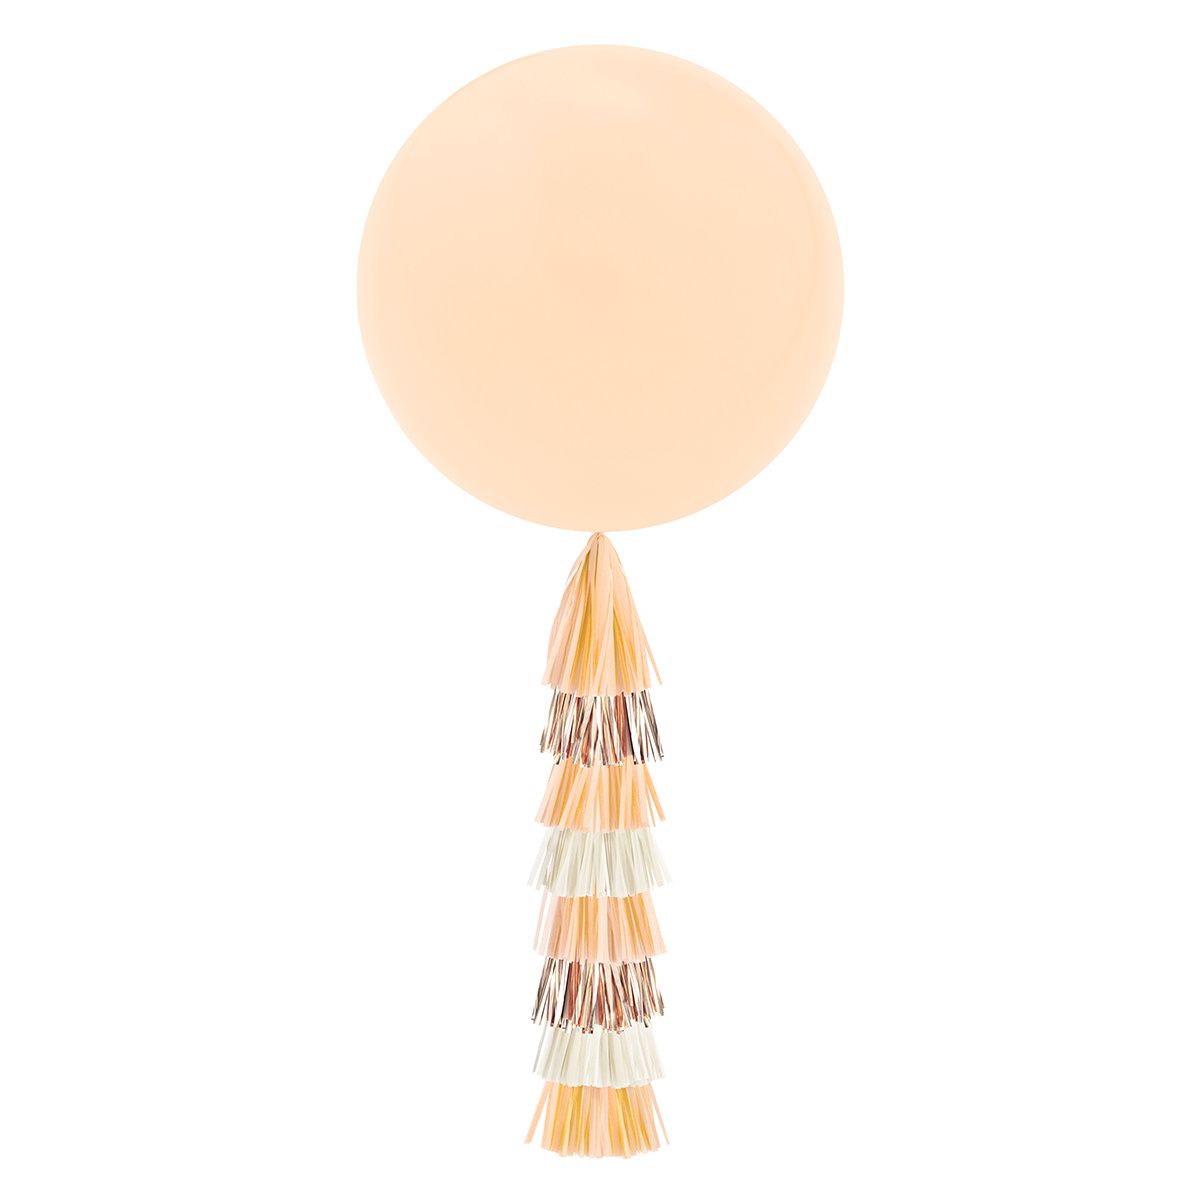 Giant Balloon with Tassels - Peach & Rose Gold (Not Inflated)